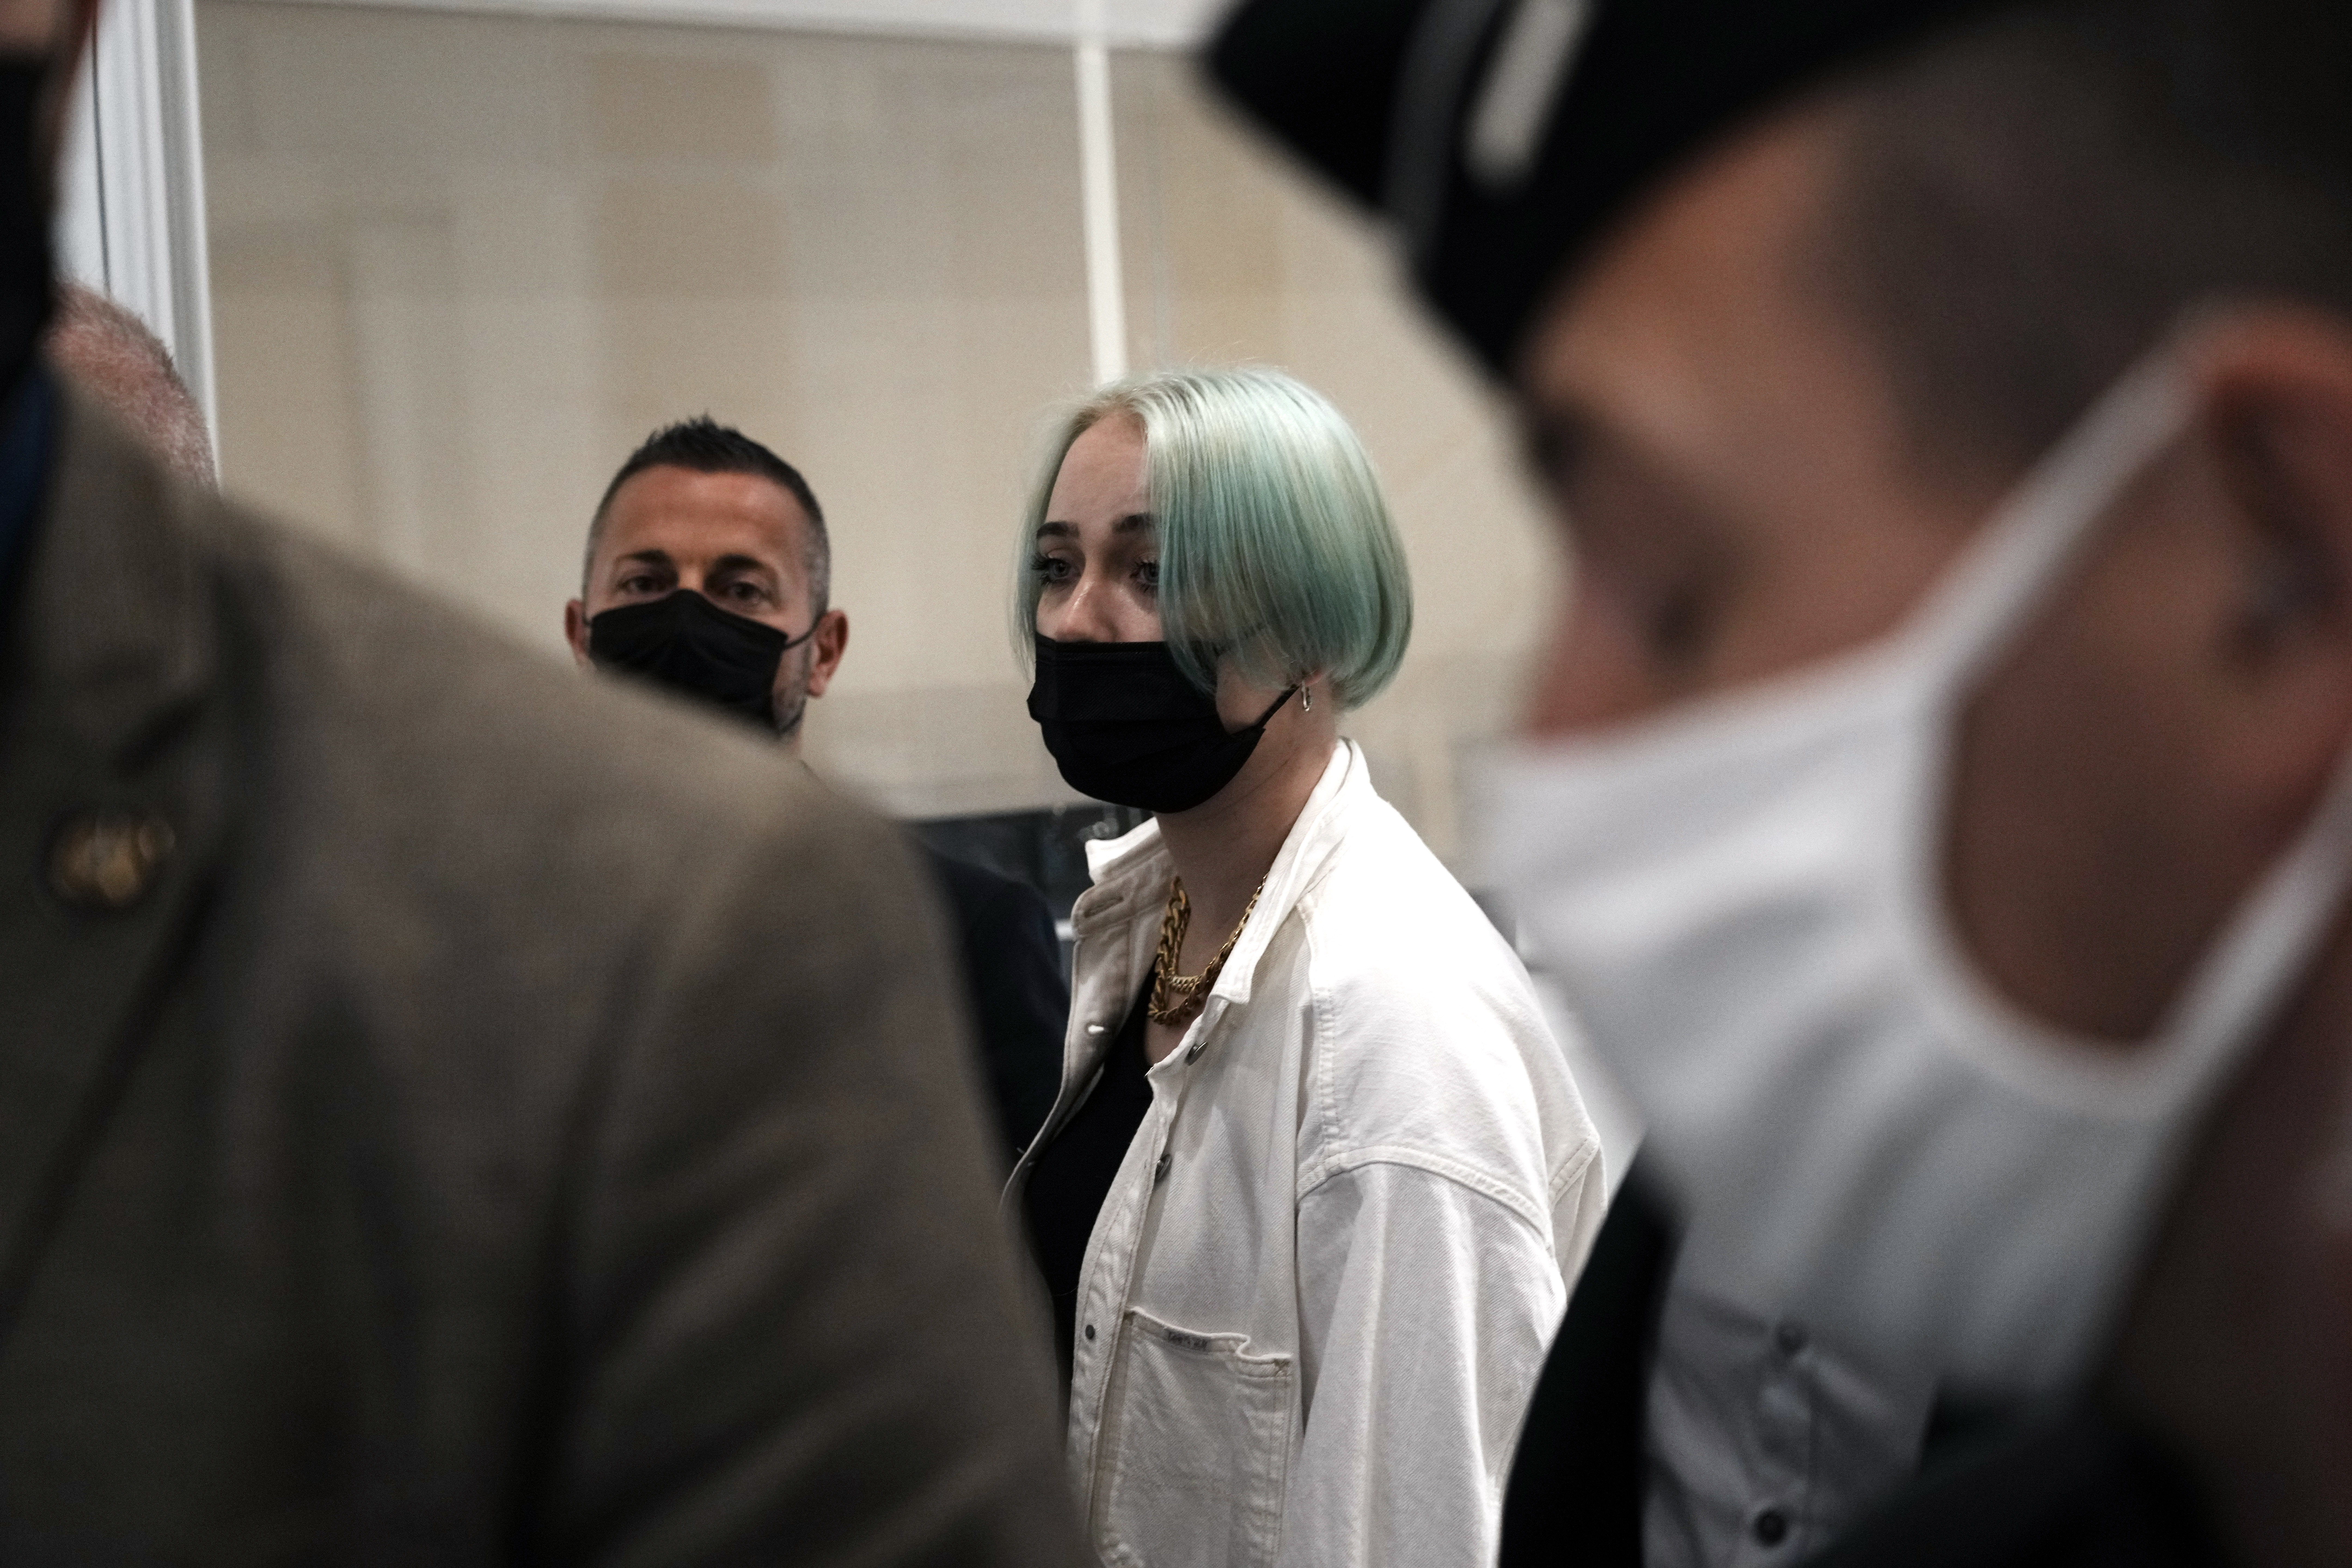 The teenager identifying herself online as Mila, center right, leaves the courtroom Monday, June 21, 2021 in Paris. Thirteen people went on trial in Paris accused of cyberbullying or death threats against the teenage girl who posted comments online critical of Islam. (AP Photo/Thibault Camus)